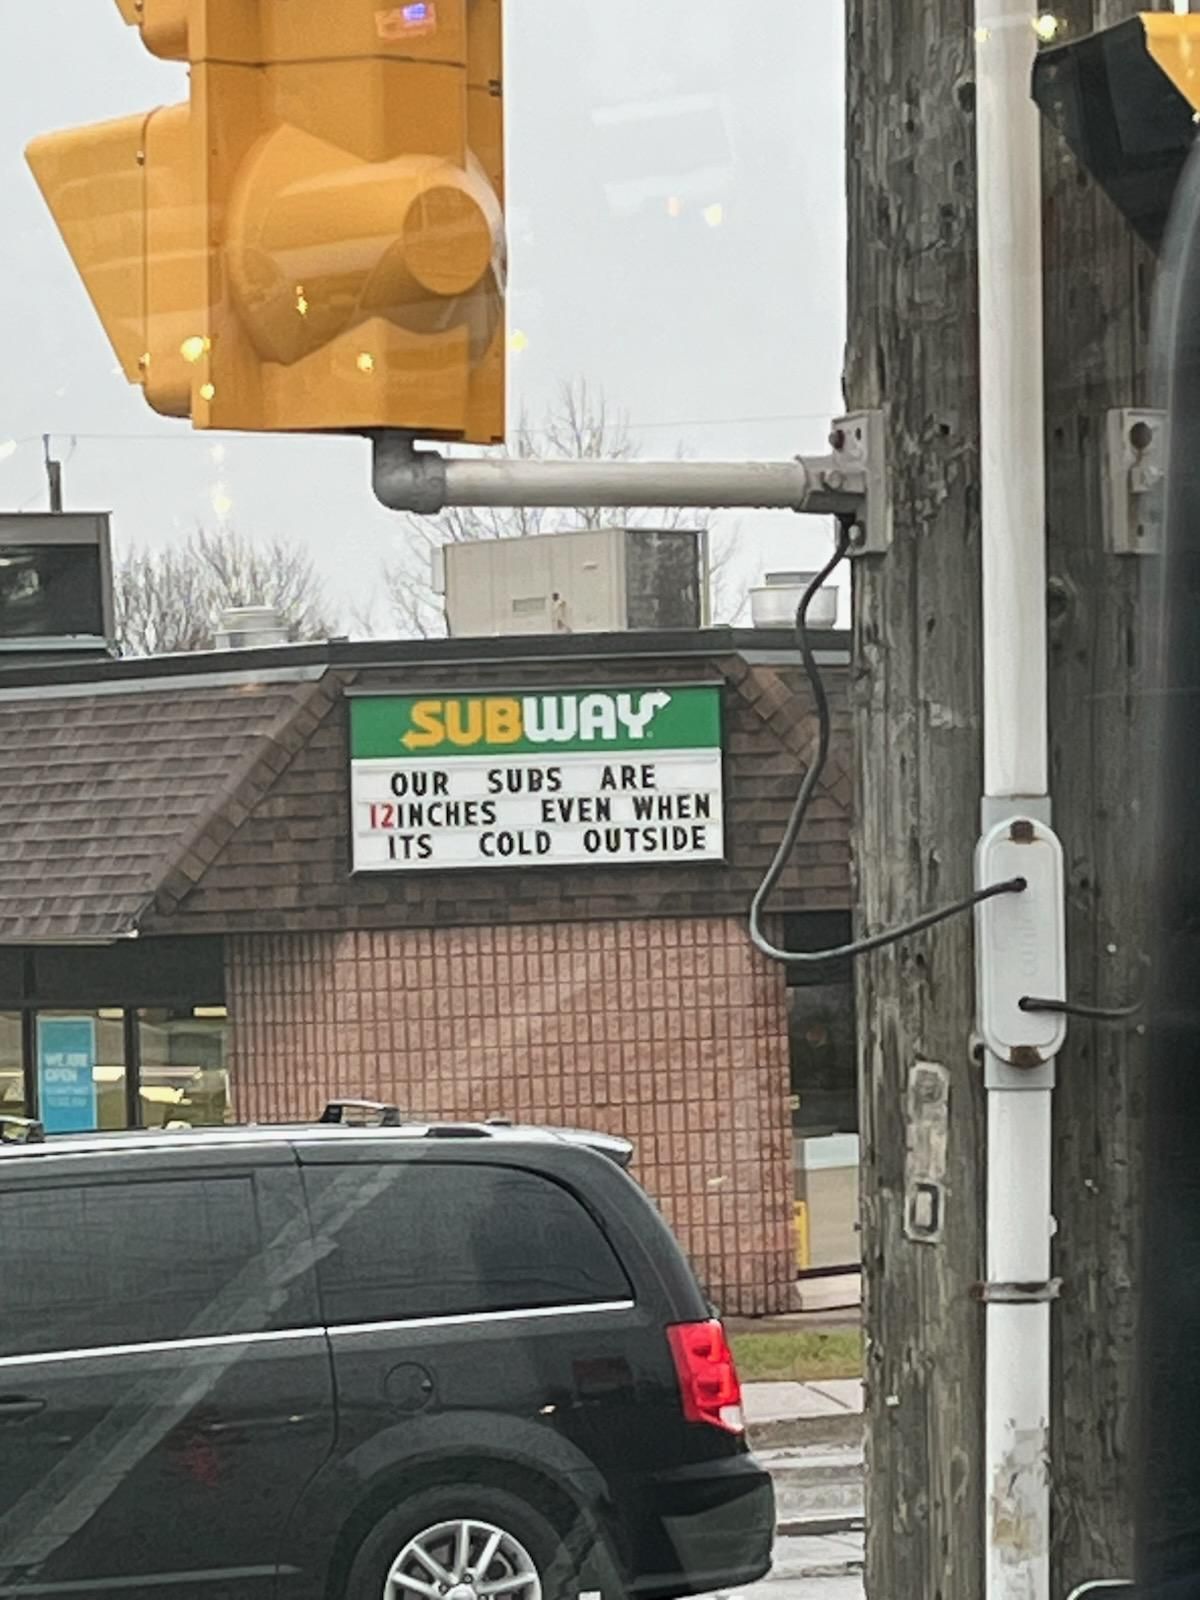 Subway on point wit their winter marketing.